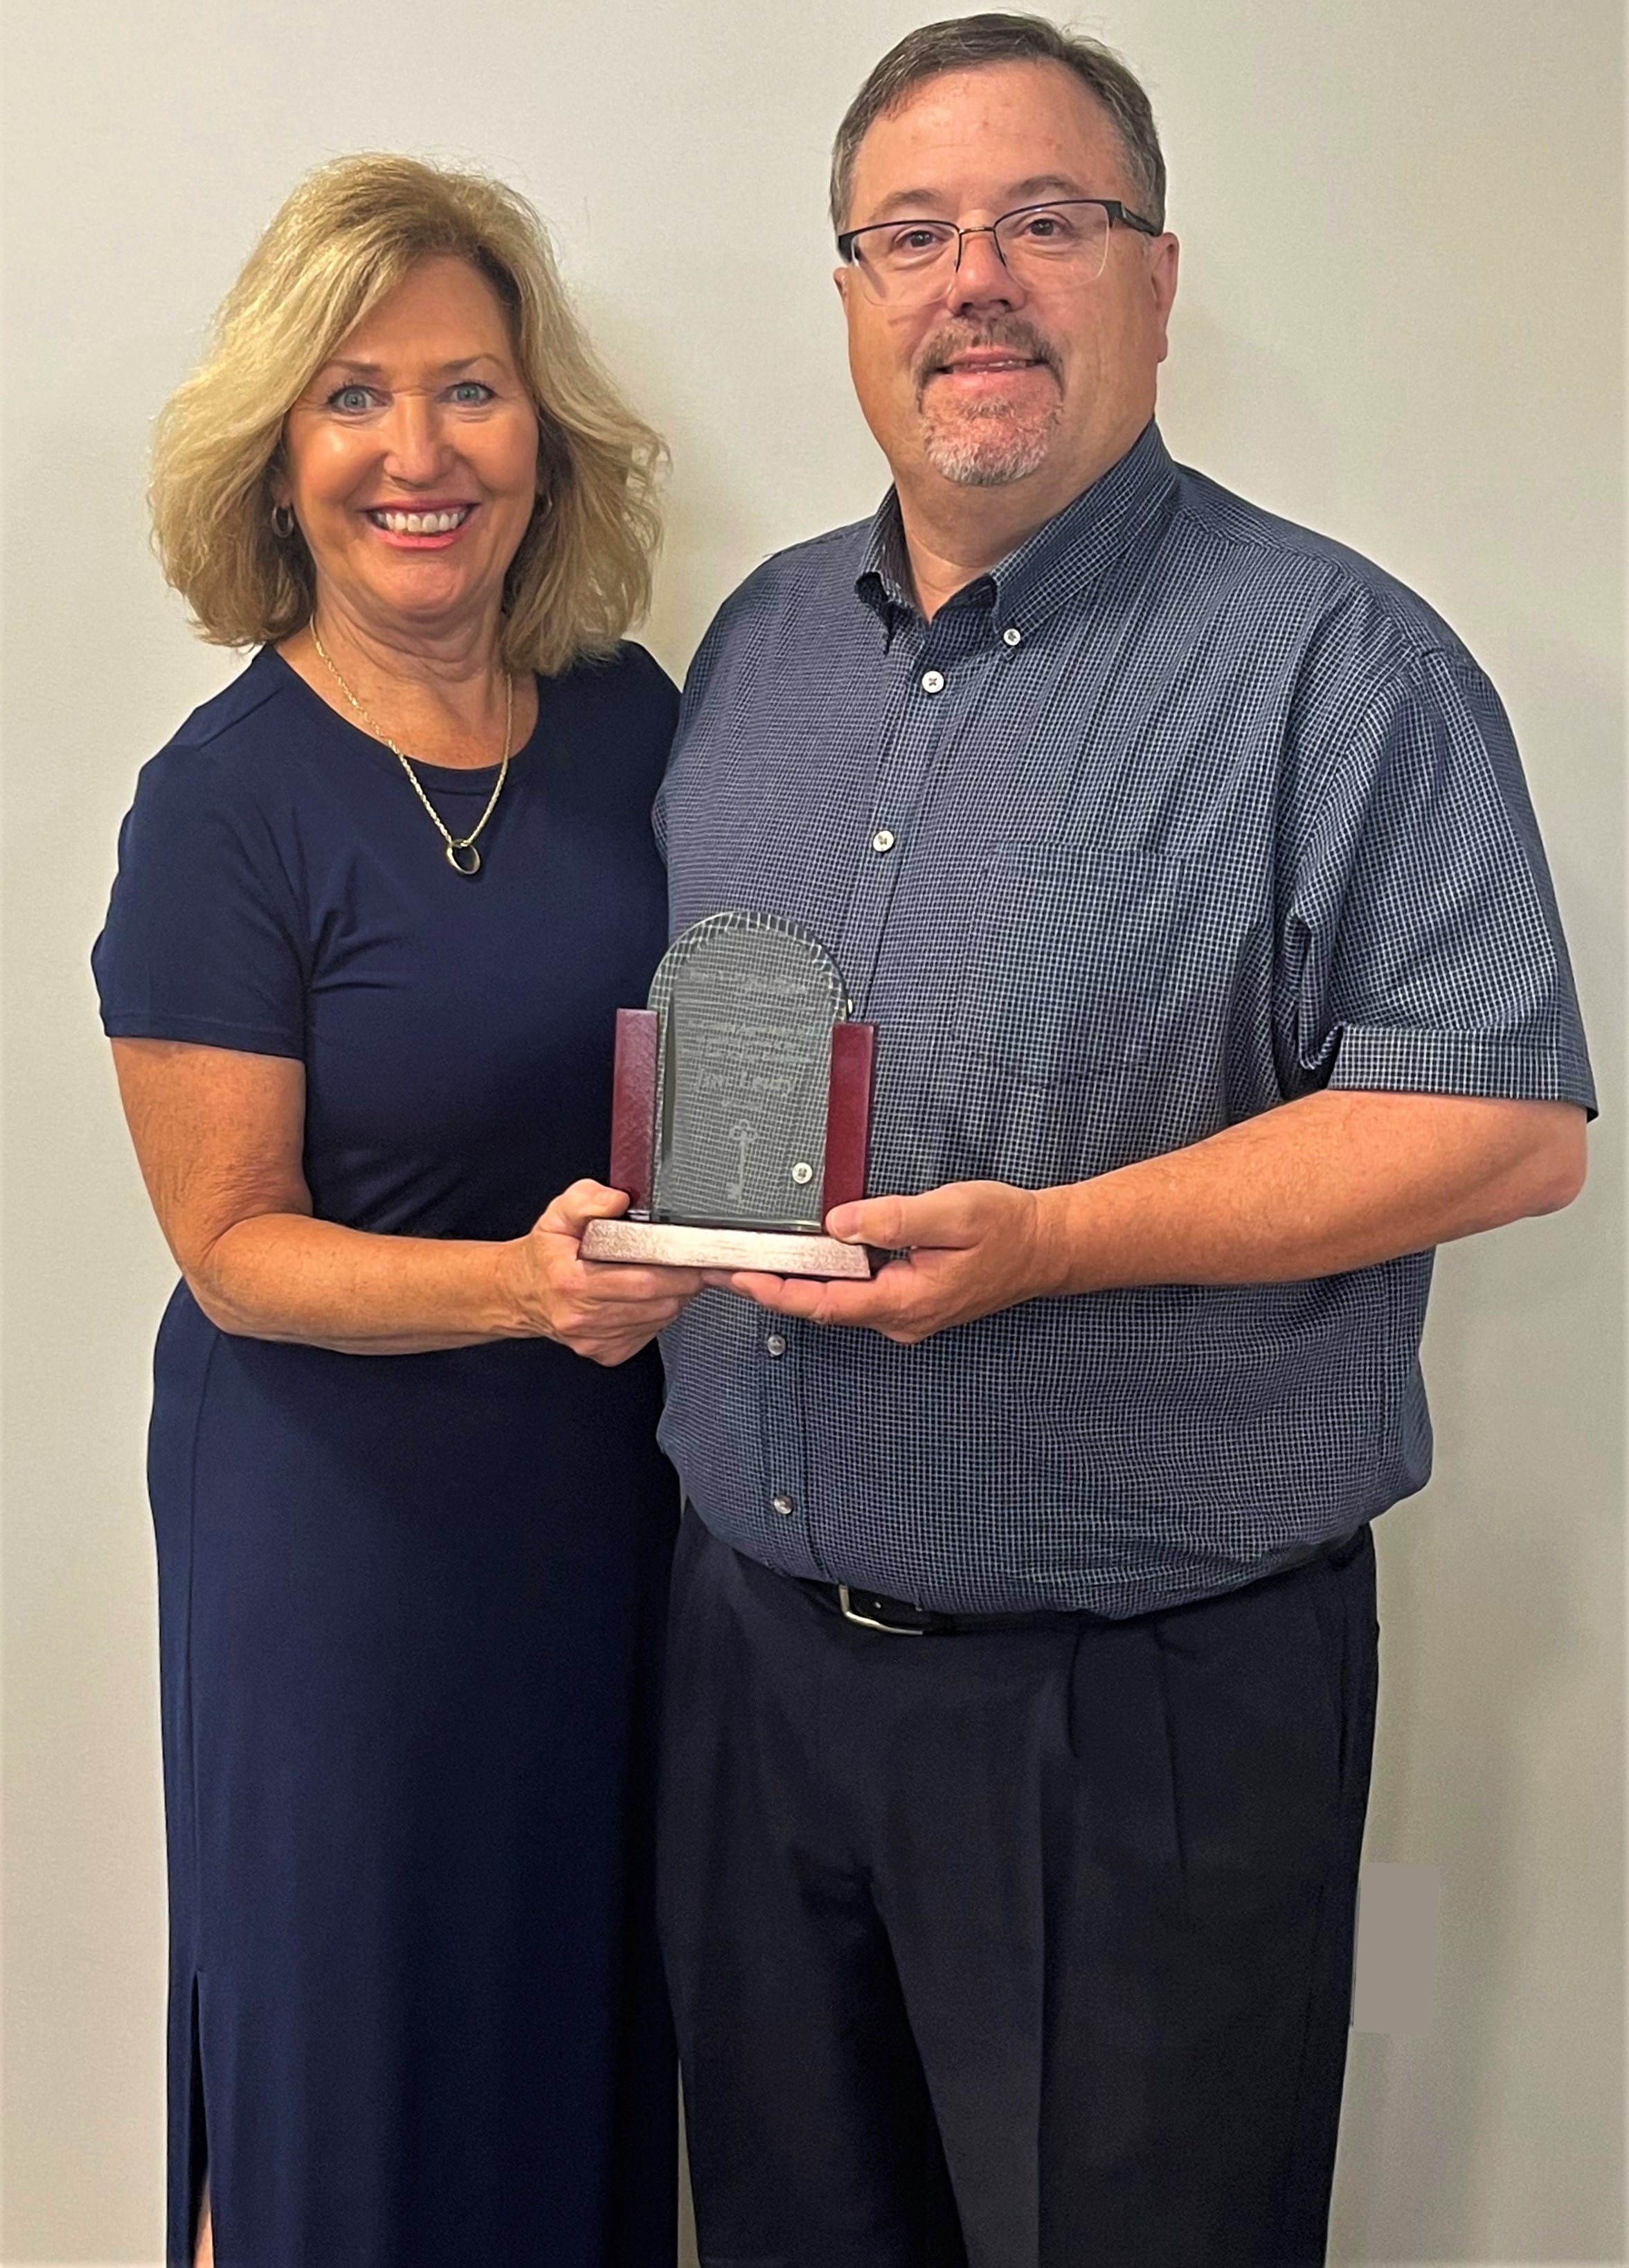 Jim Leuty (right) is pictured with RLC Foundation Interim CEO Pat Kern as he receives recognition for 11 years of service with the RLC Foundation Board of Directors.